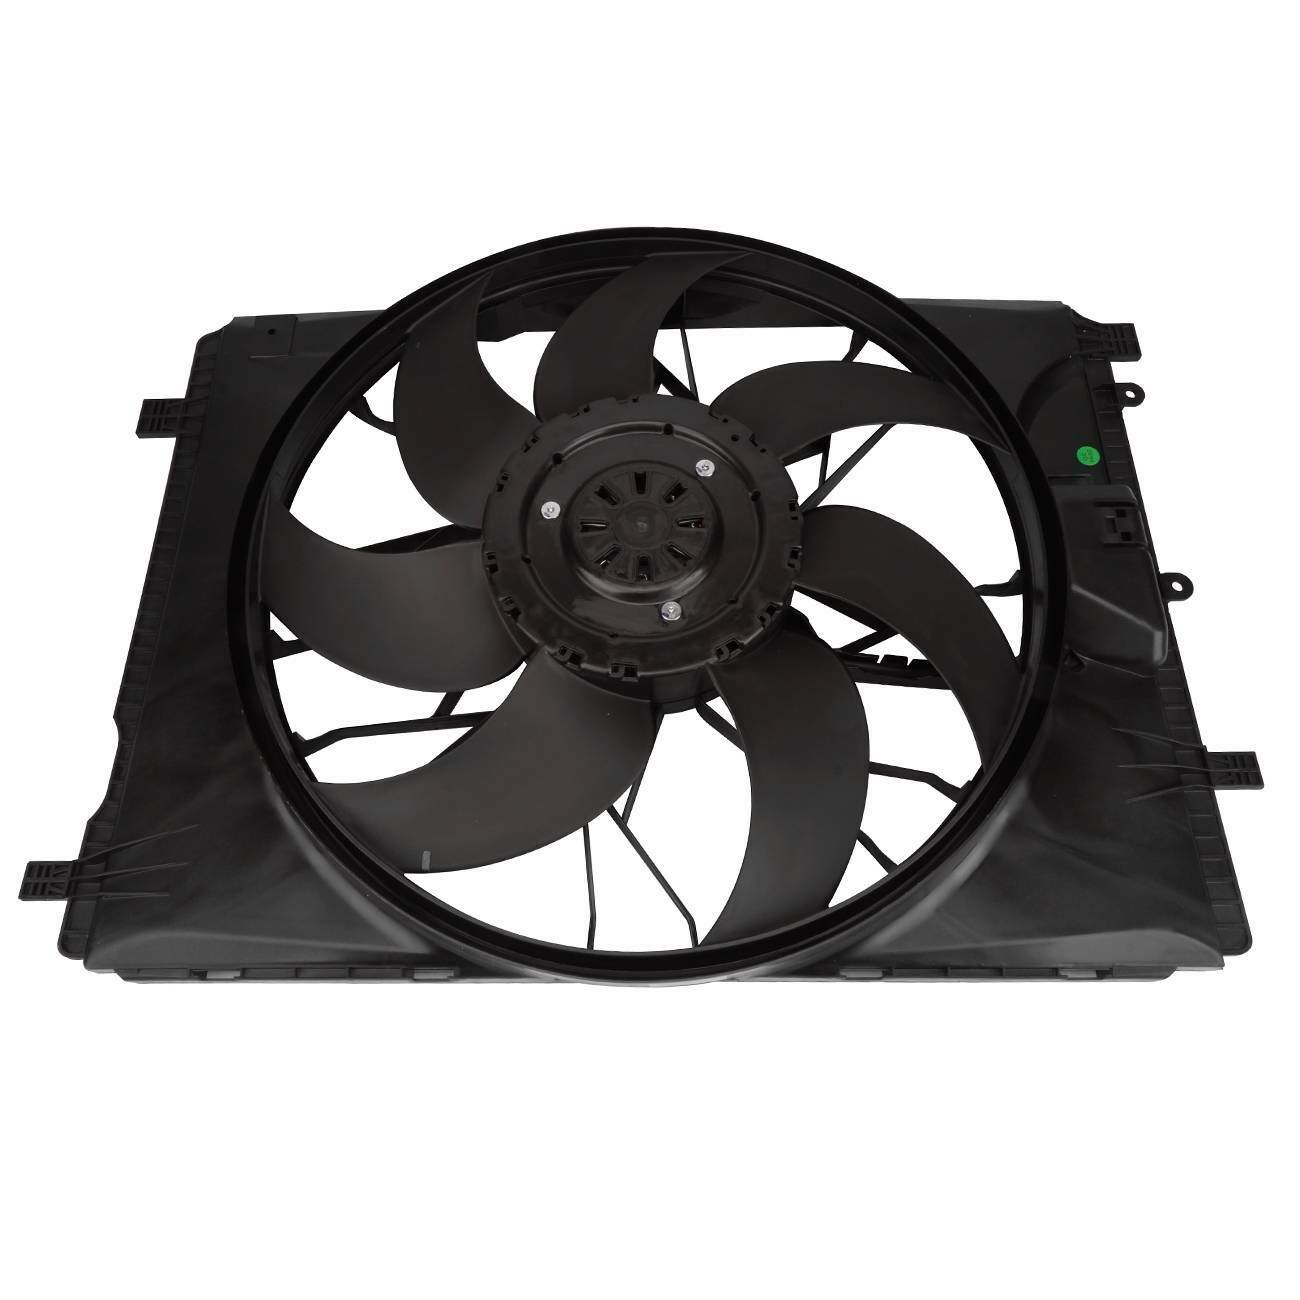 Radiator Cooling Fan Assembly 400W for Mercedes W203 S203 C203 C209 German Made